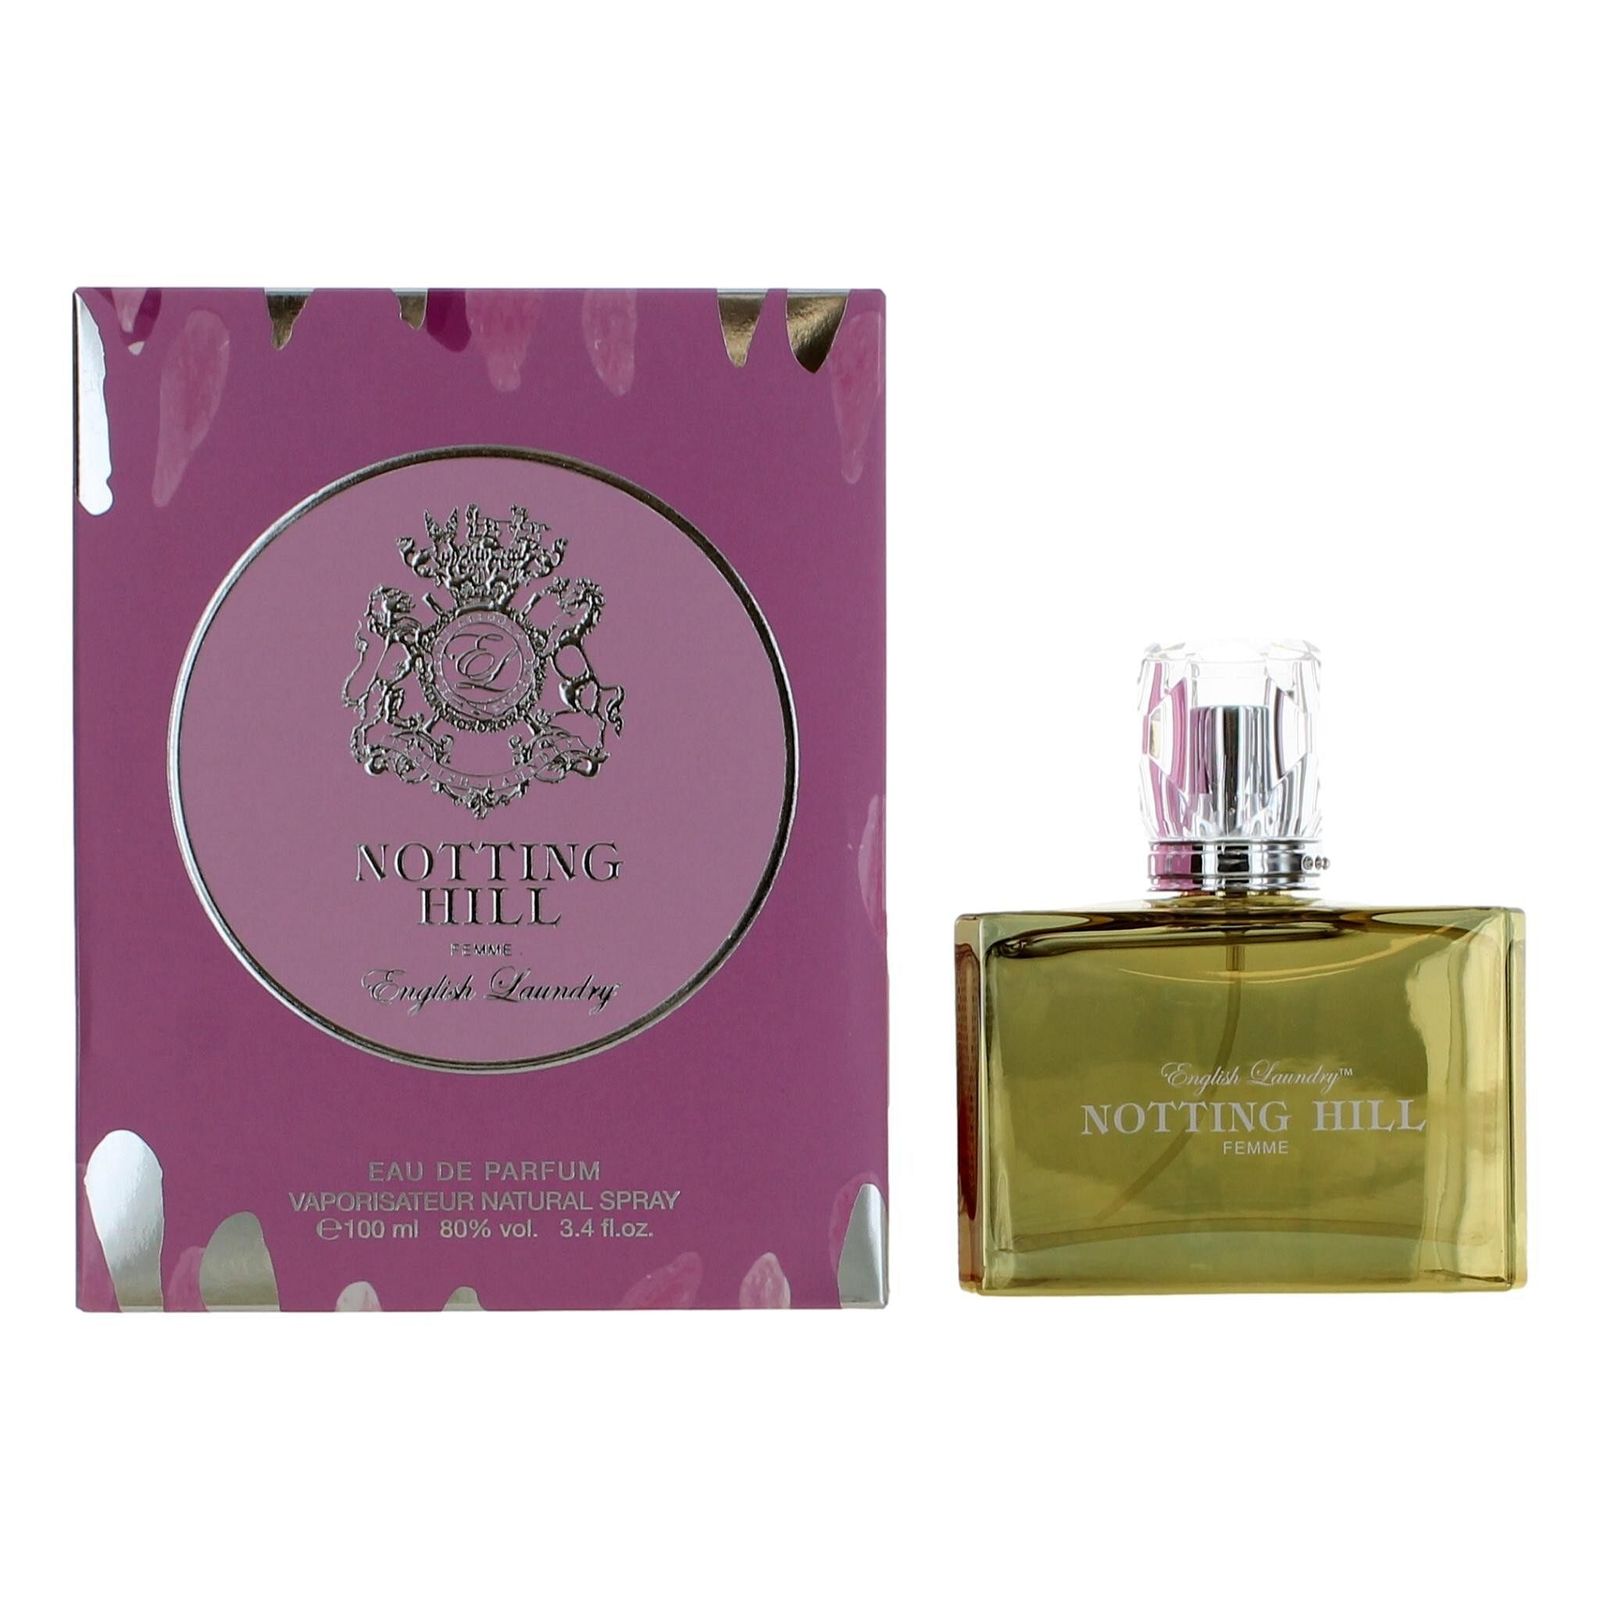 Primary image for Notting Hill by English Laundry, 3.4 oz Eau De Parfum Spray for Women